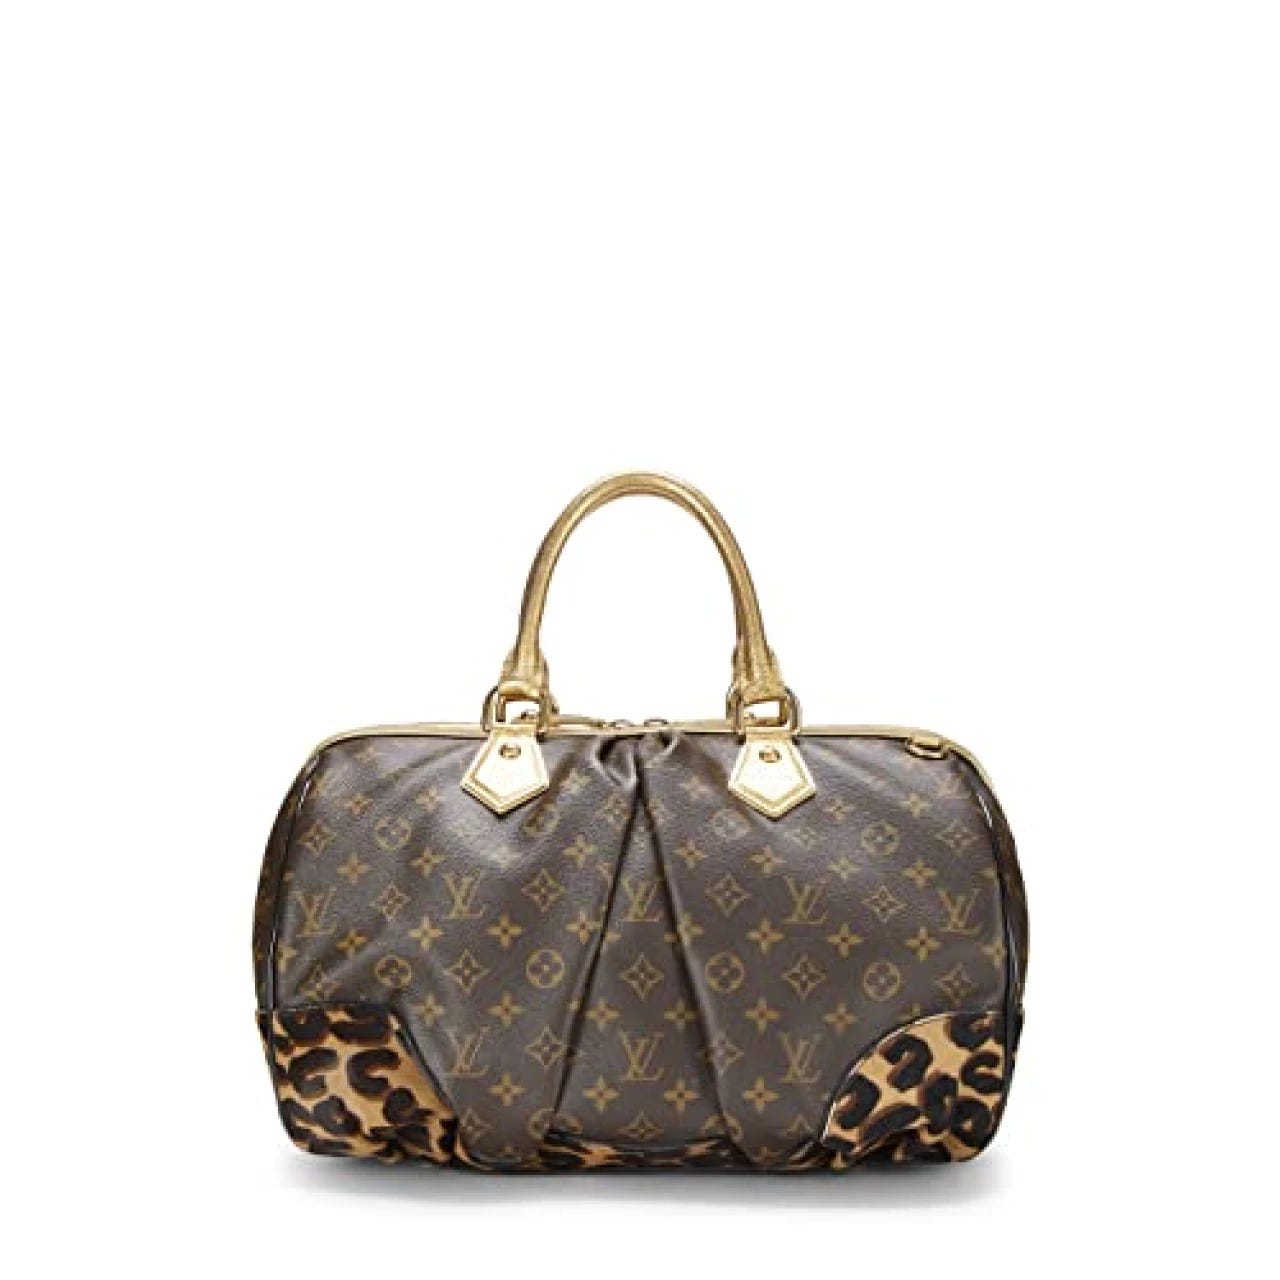 2023 Review: Choosing the Perfect Pre-Loved Louis Vuitton Bag, by Lourdes, Sep, 2023